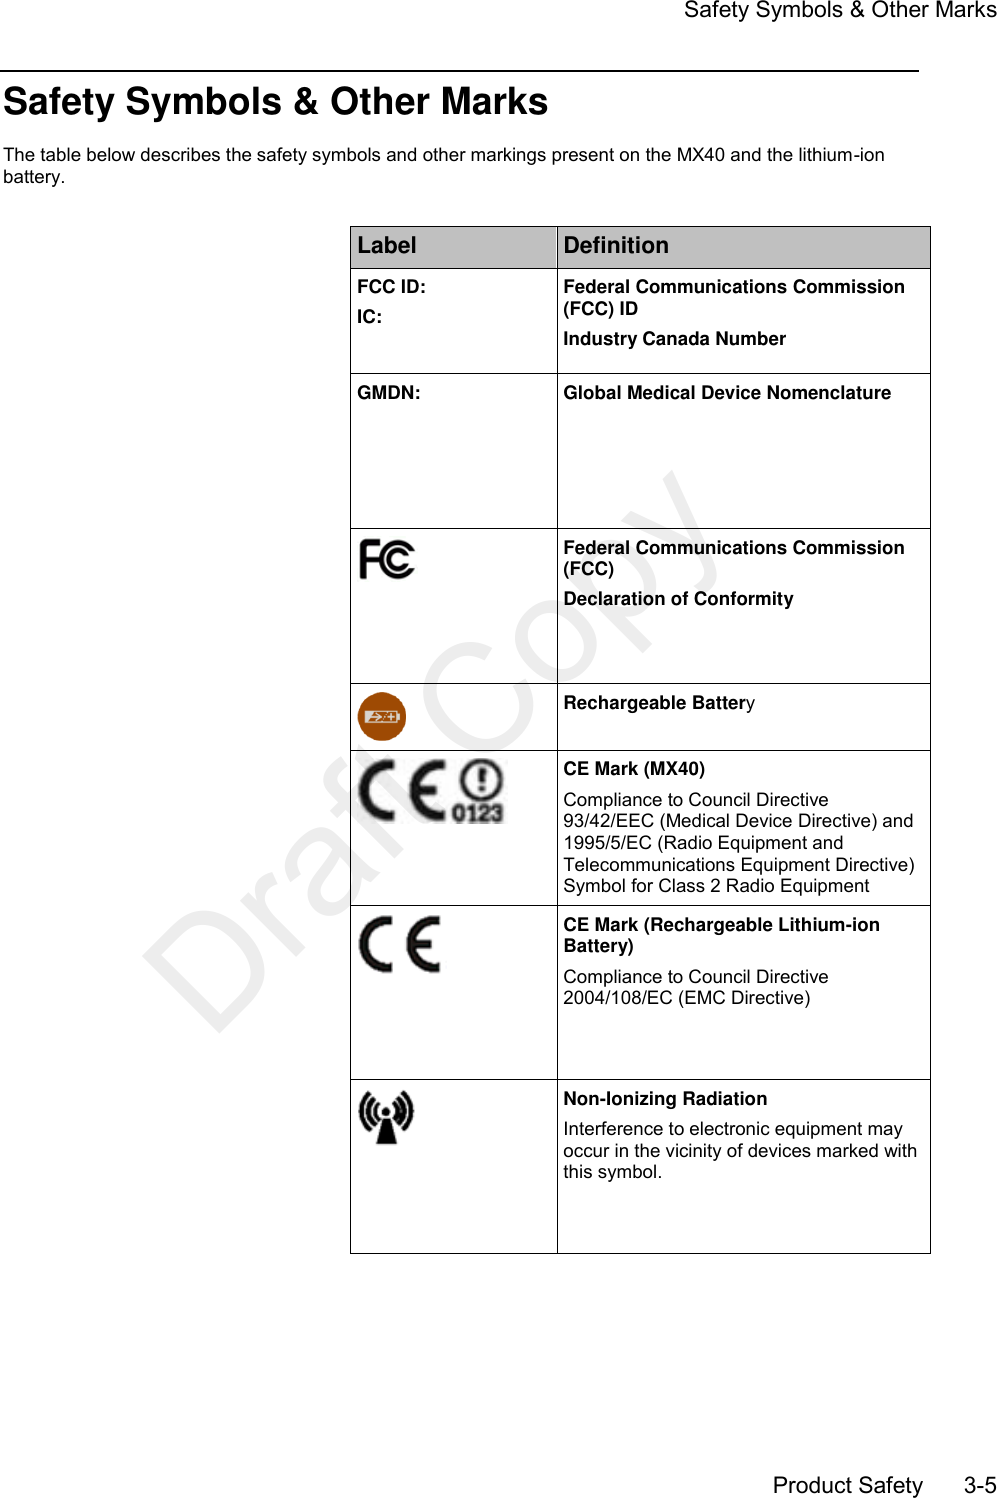     Safety Symbols &amp; Other Marks       Product Safety       3-5 Safety Symbols &amp; Other Marks The table below describes the safety symbols and other markings present on the MX40 and the lithium-ion battery.  Label Definition FCC ID: IC: Federal Communications Commission (FCC) ID Industry Canada Number GMDN: Global Medical Device Nomenclature  Federal Communications Commission (FCC)   Declaration of Conformity  Rechargeable Battery  CE Mark (MX40) Compliance to Council Directive 93/42/EEC (Medical Device Directive) and 1995/5/EC (Radio Equipment and Telecommunications Equipment Directive) Symbol for Class 2 Radio Equipment    CE Mark (Rechargeable Lithium-ion Battery) Compliance to Council Directive 2004/108/EC (EMC Directive)   Non-Ionizing Radiation Interference to electronic equipment may occur in the vicinity of devices marked with this symbol. Draft Copy